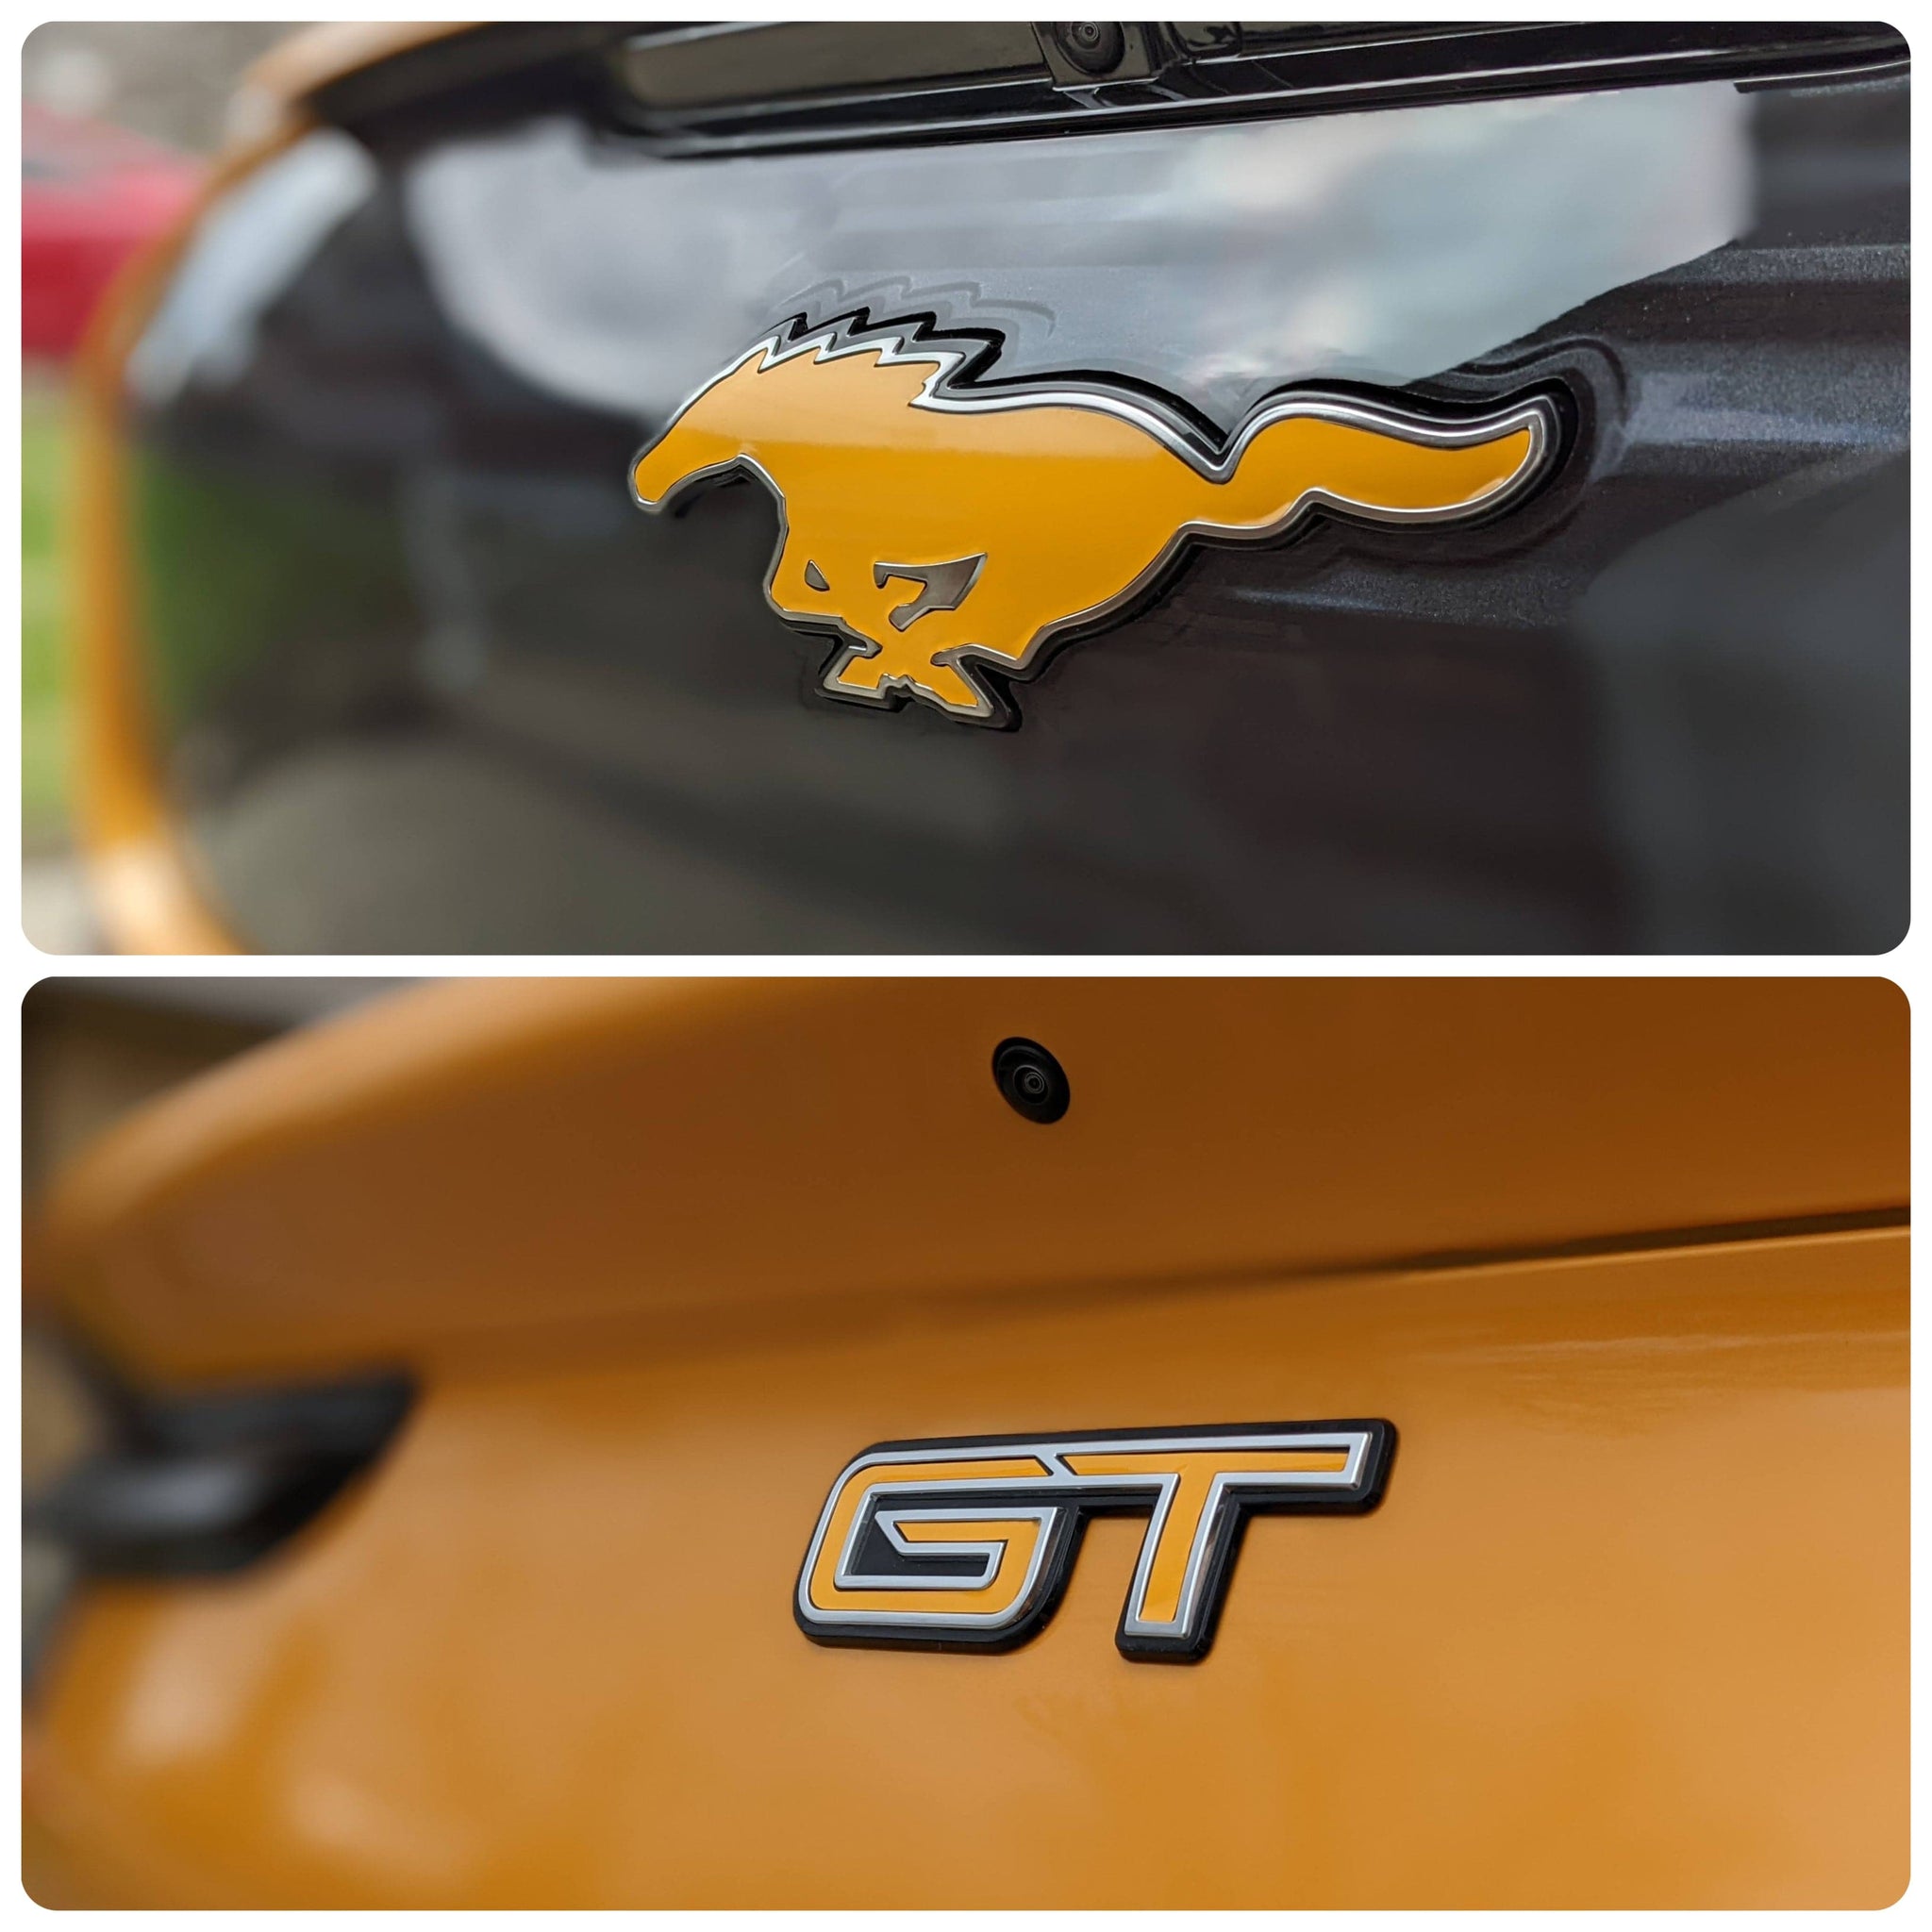 2021+ Ford Mustang Mach-E - Front Mustang and Rear GT Emblem VinylMod Overlays